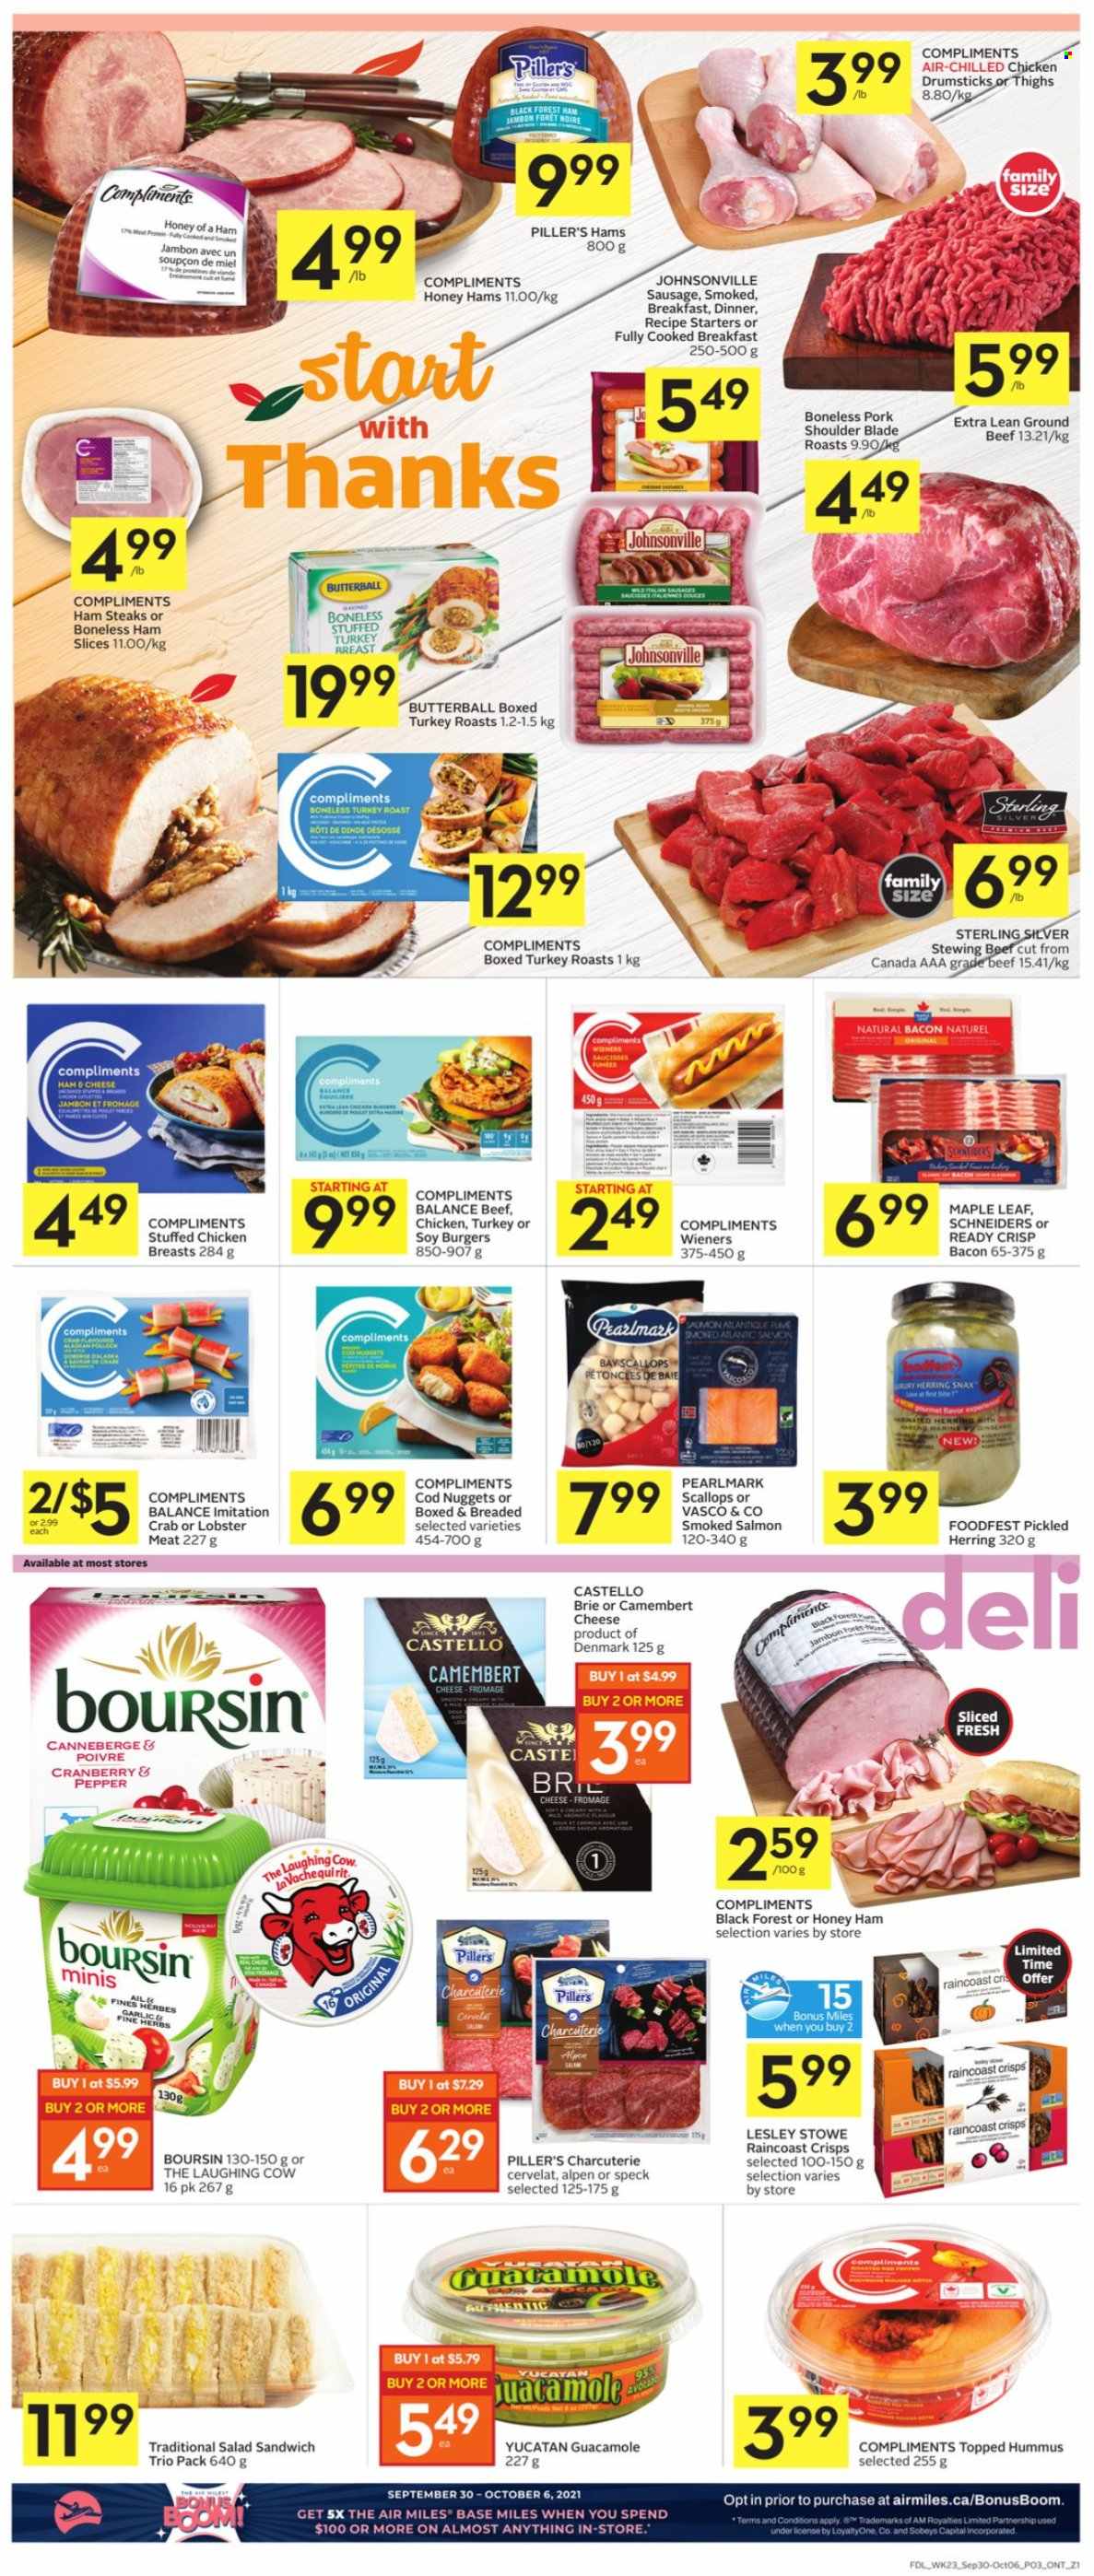 thumbnail - Foodland Flyer - September 30, 2021 - October 06, 2021 - Sales products - garlic, cod, lobster, salmon, scallops, smoked salmon, herring, crab, nuggets, hamburger, stuffed chicken, turkey roast, bacon, Butterball, ham, Johnsonville, sausage, hummus, guacamole, ham steaks, cheese, brie, The Laughing Cow, herbs, chicken drumsticks, chicken, beef meat, ground beef, stewing beef, pork meat, pork shoulder, camembert, steak. Page 3.